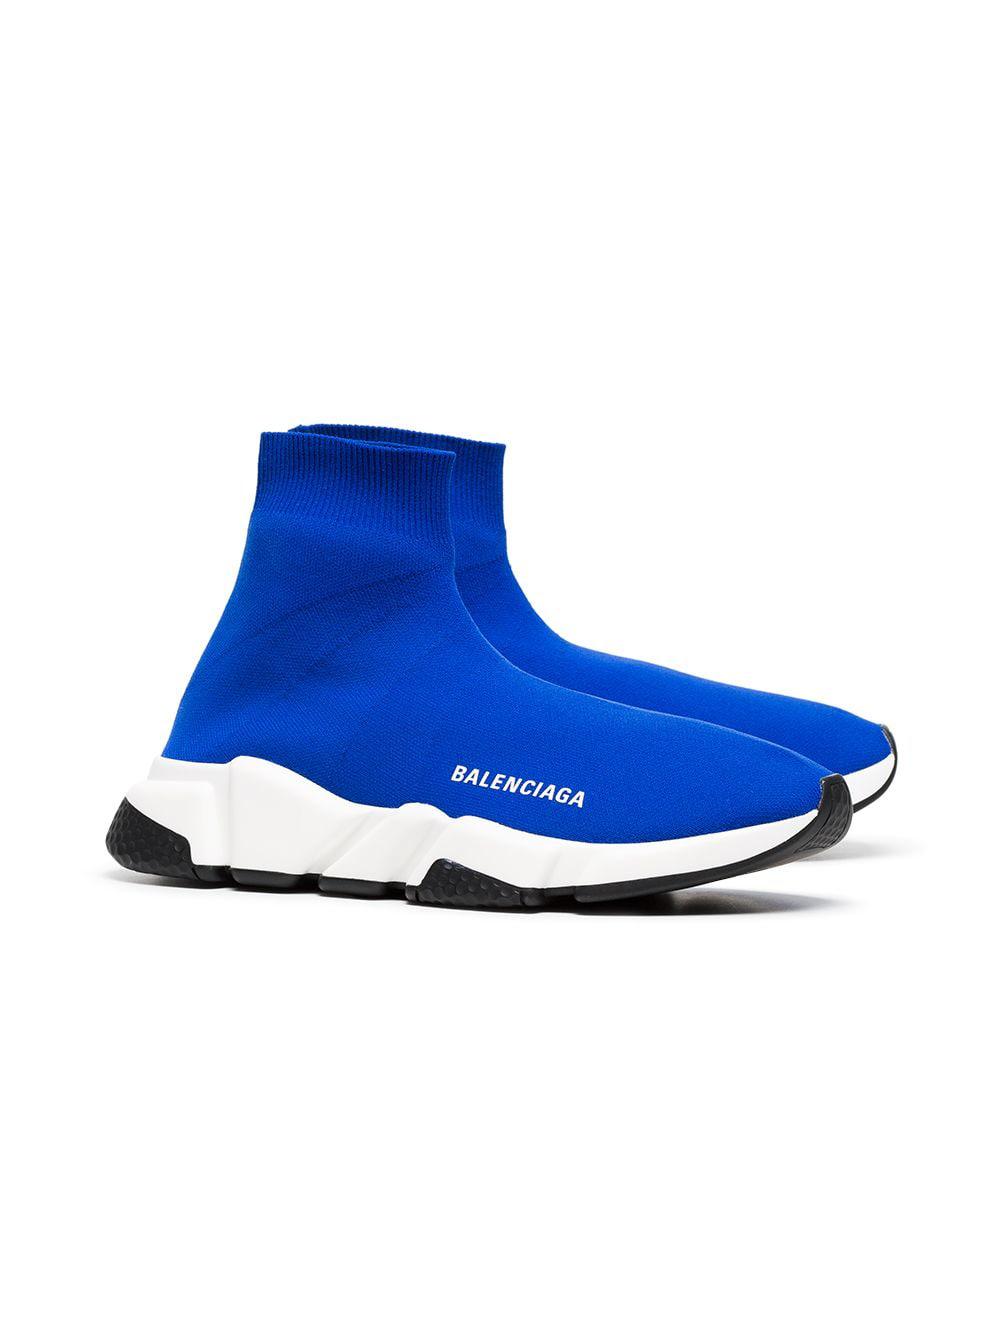 Balenciaga Blue And White Speed Sock Sneakers | Lyst